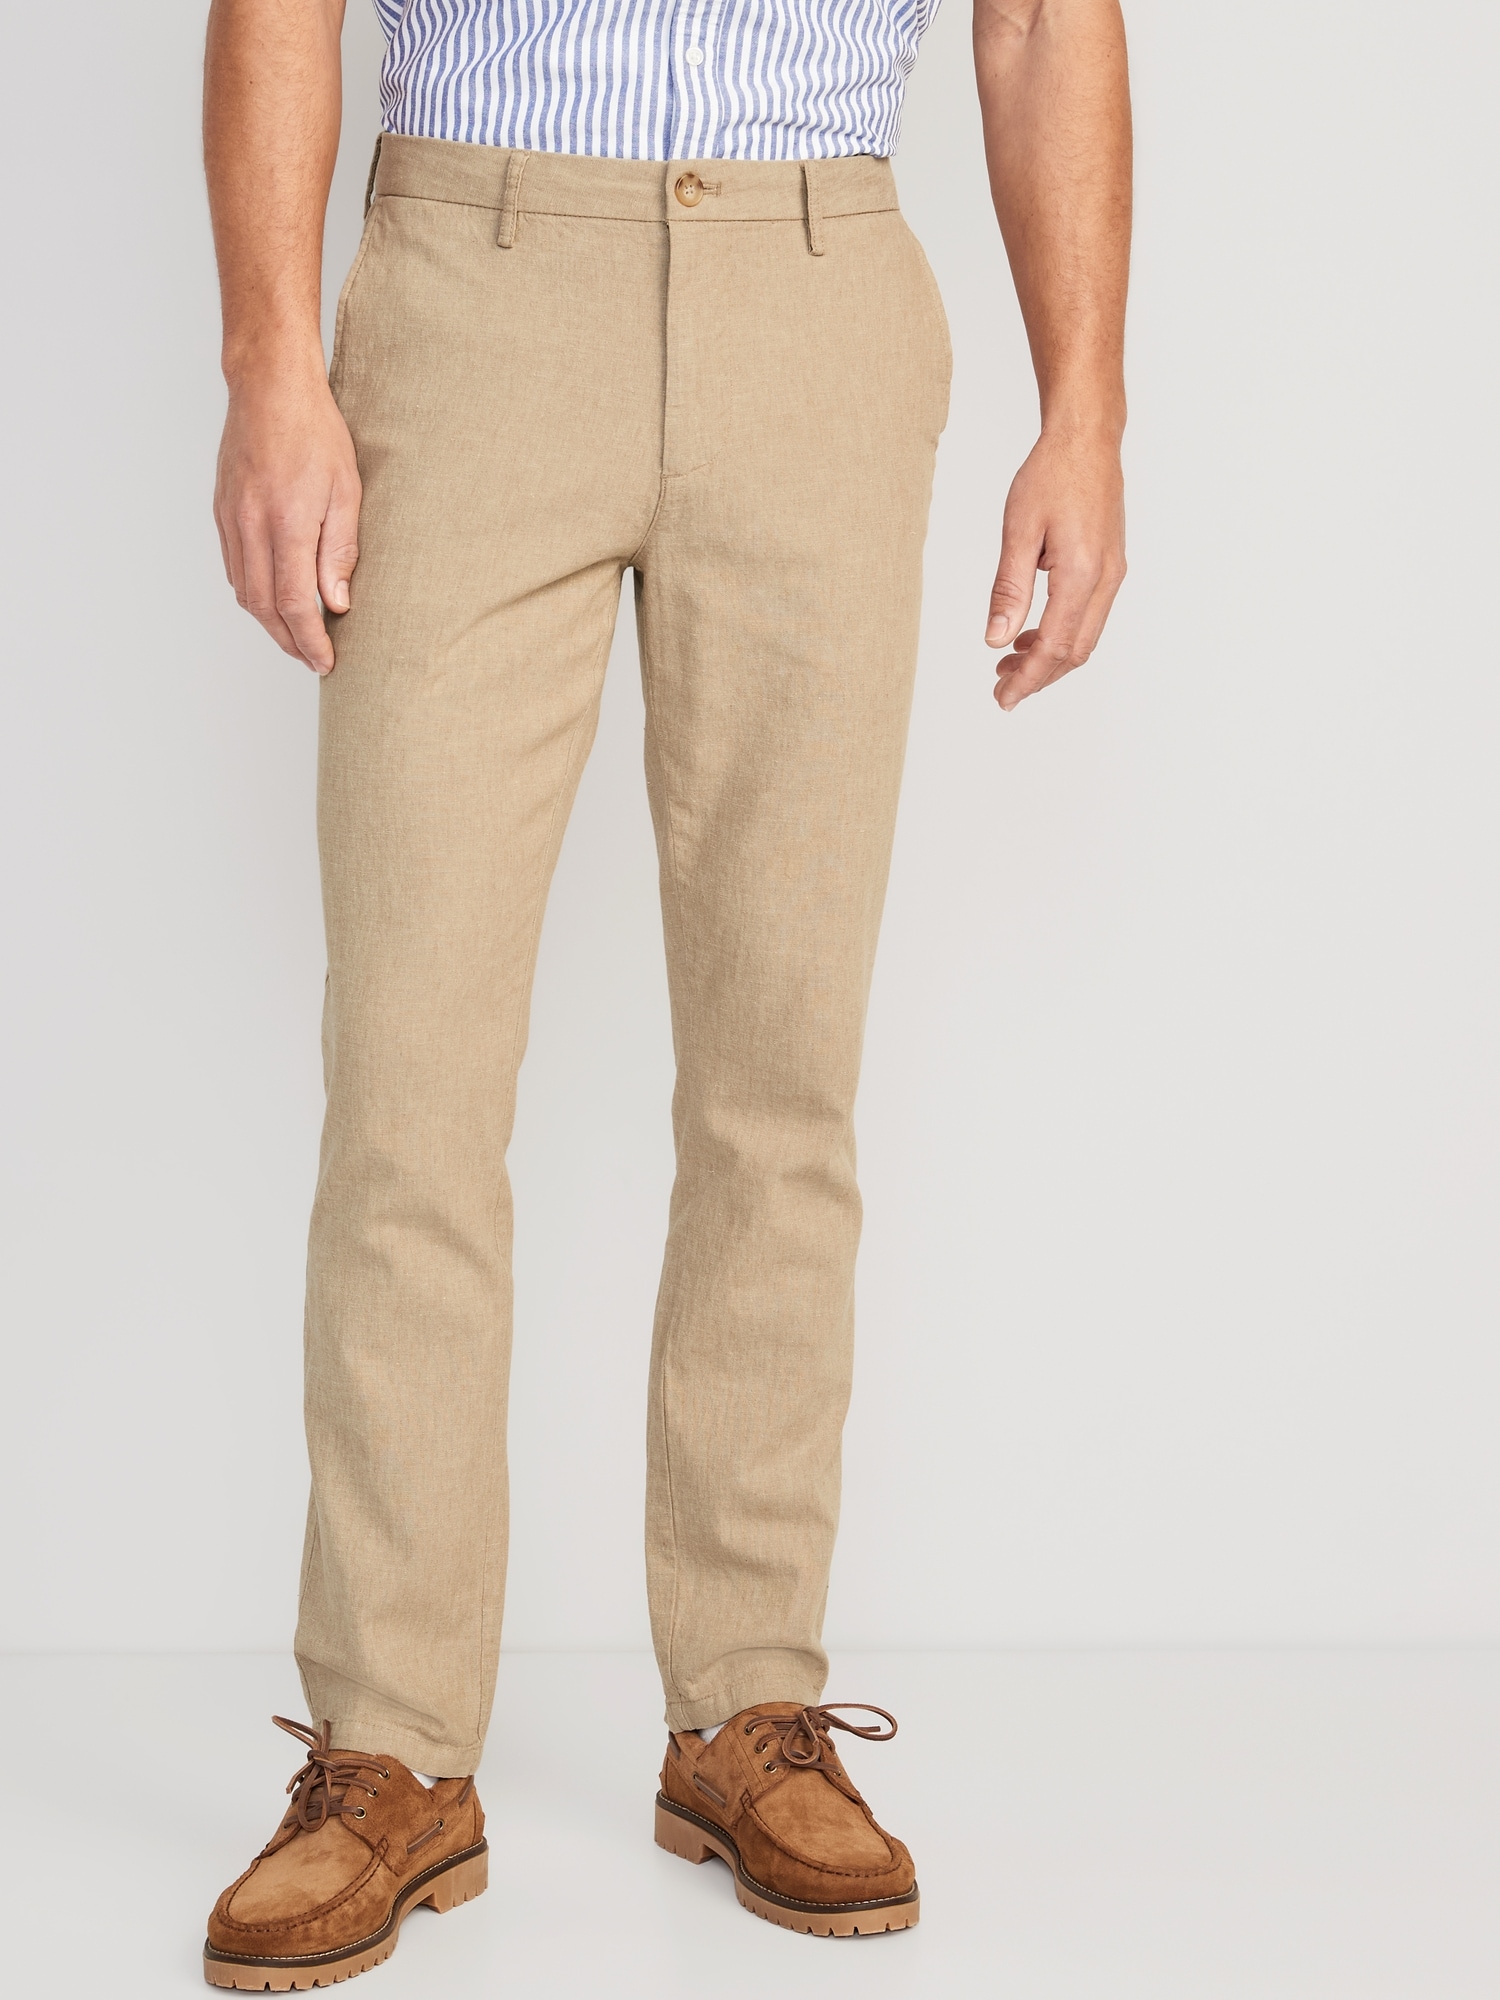 Loose Ultimate BuiltIn Flex Chino Pants for Men  Old Navy